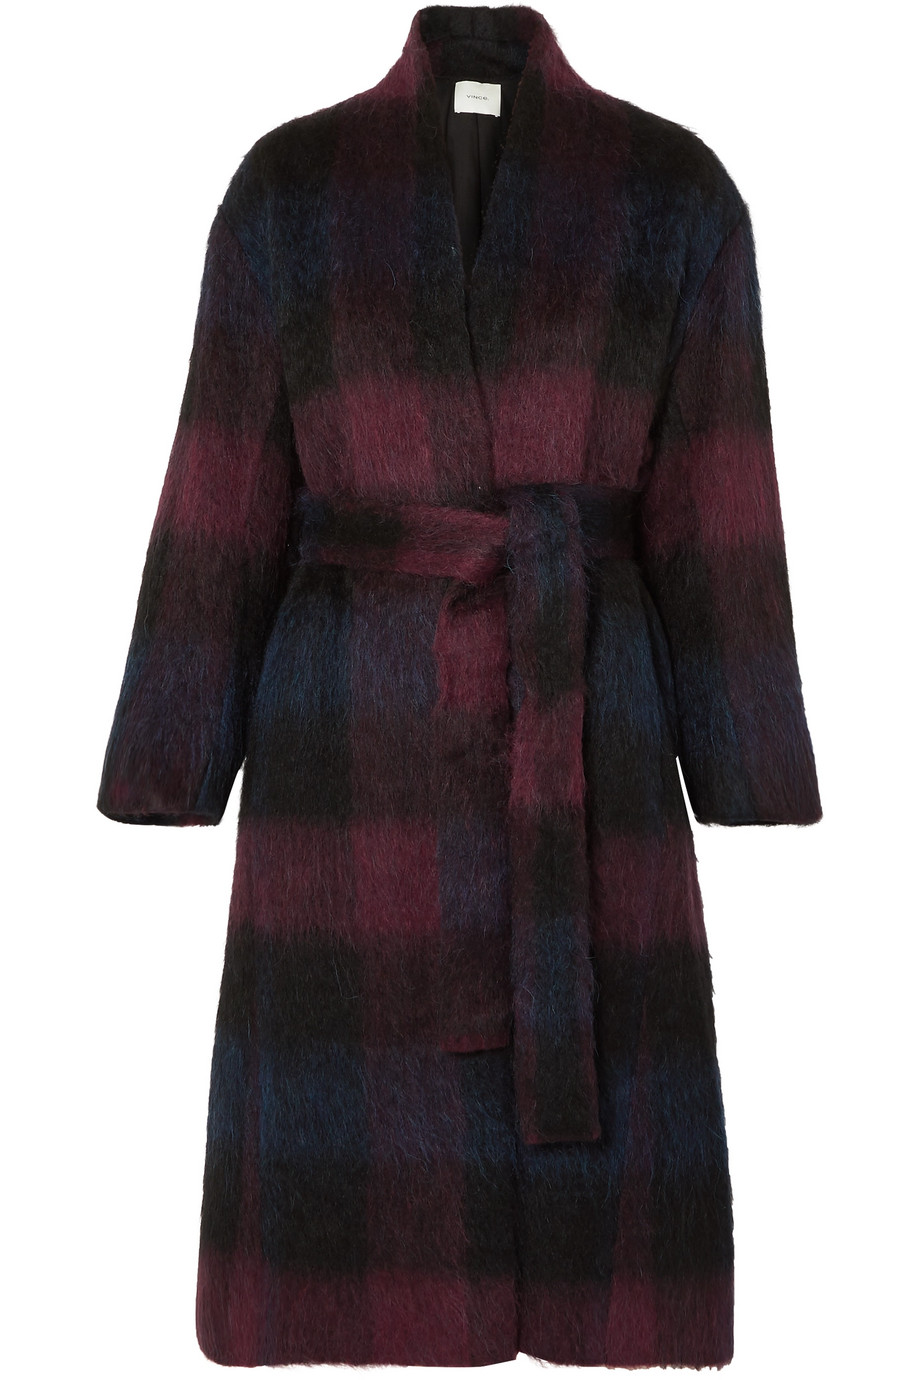 Habitually Chic® » 25 Chic Coats for Fall and Winter